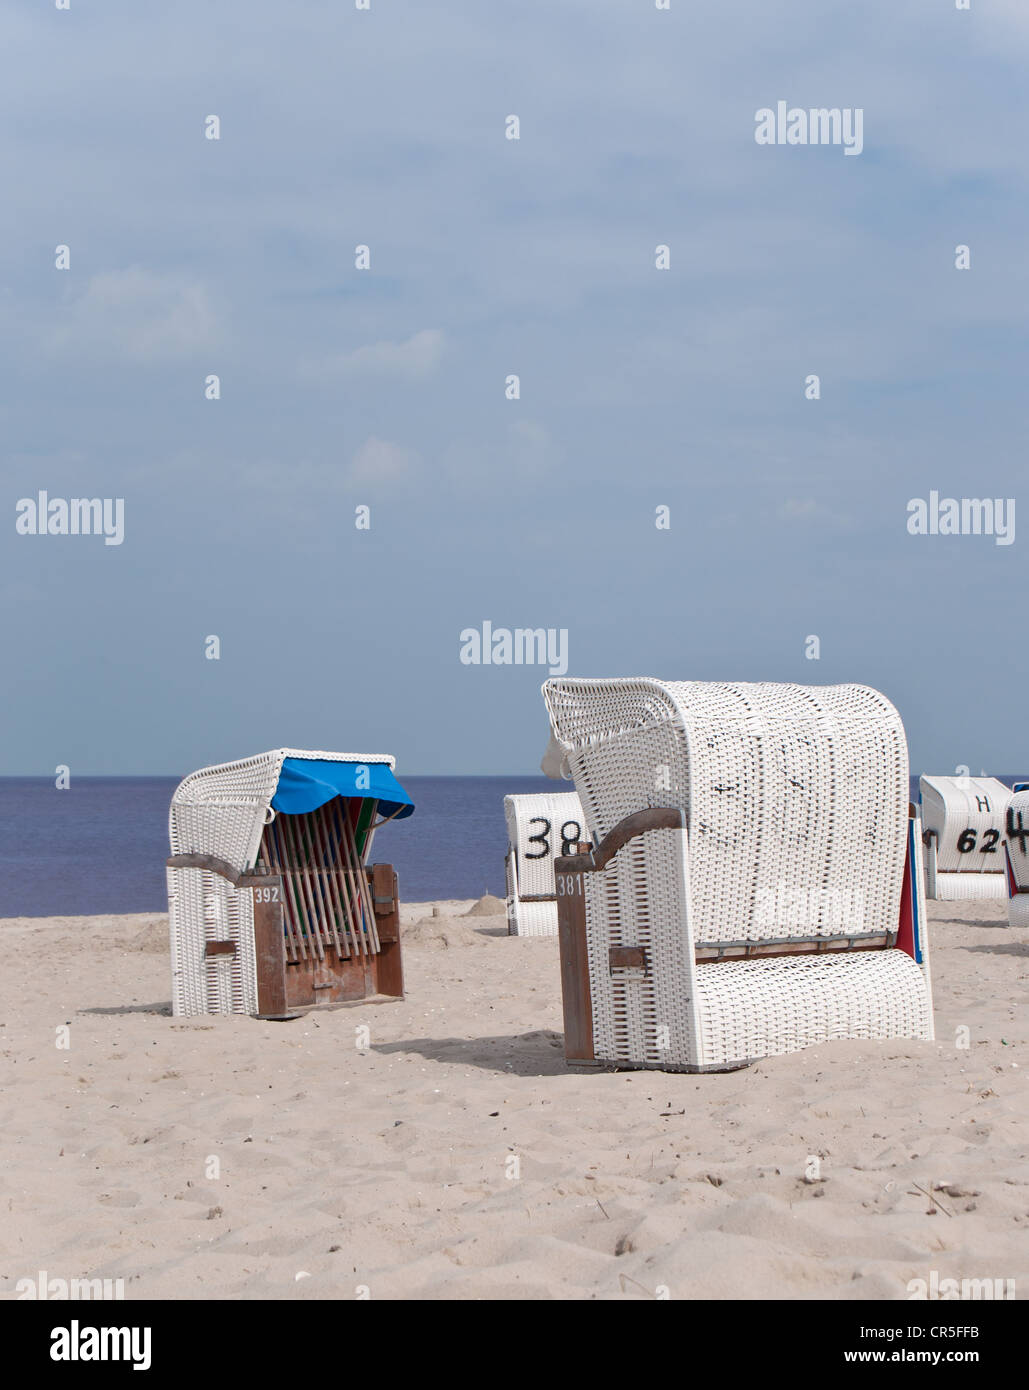 A 'Strandkorb' at the beach on a cloudy day Stock Photo